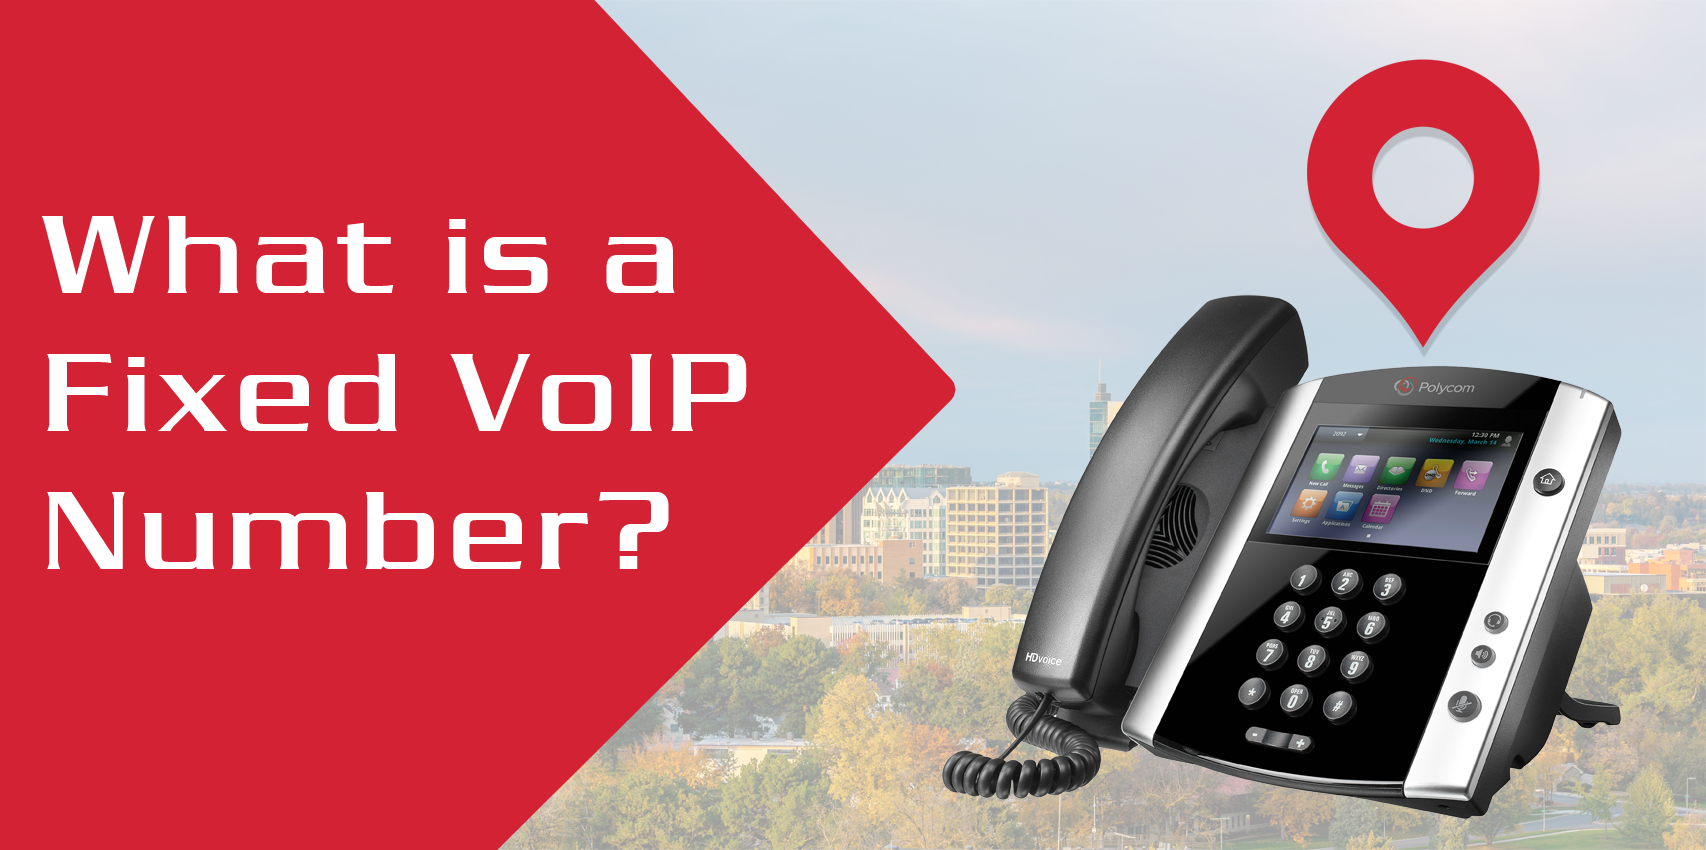 What is a Fixed VoIP Number?